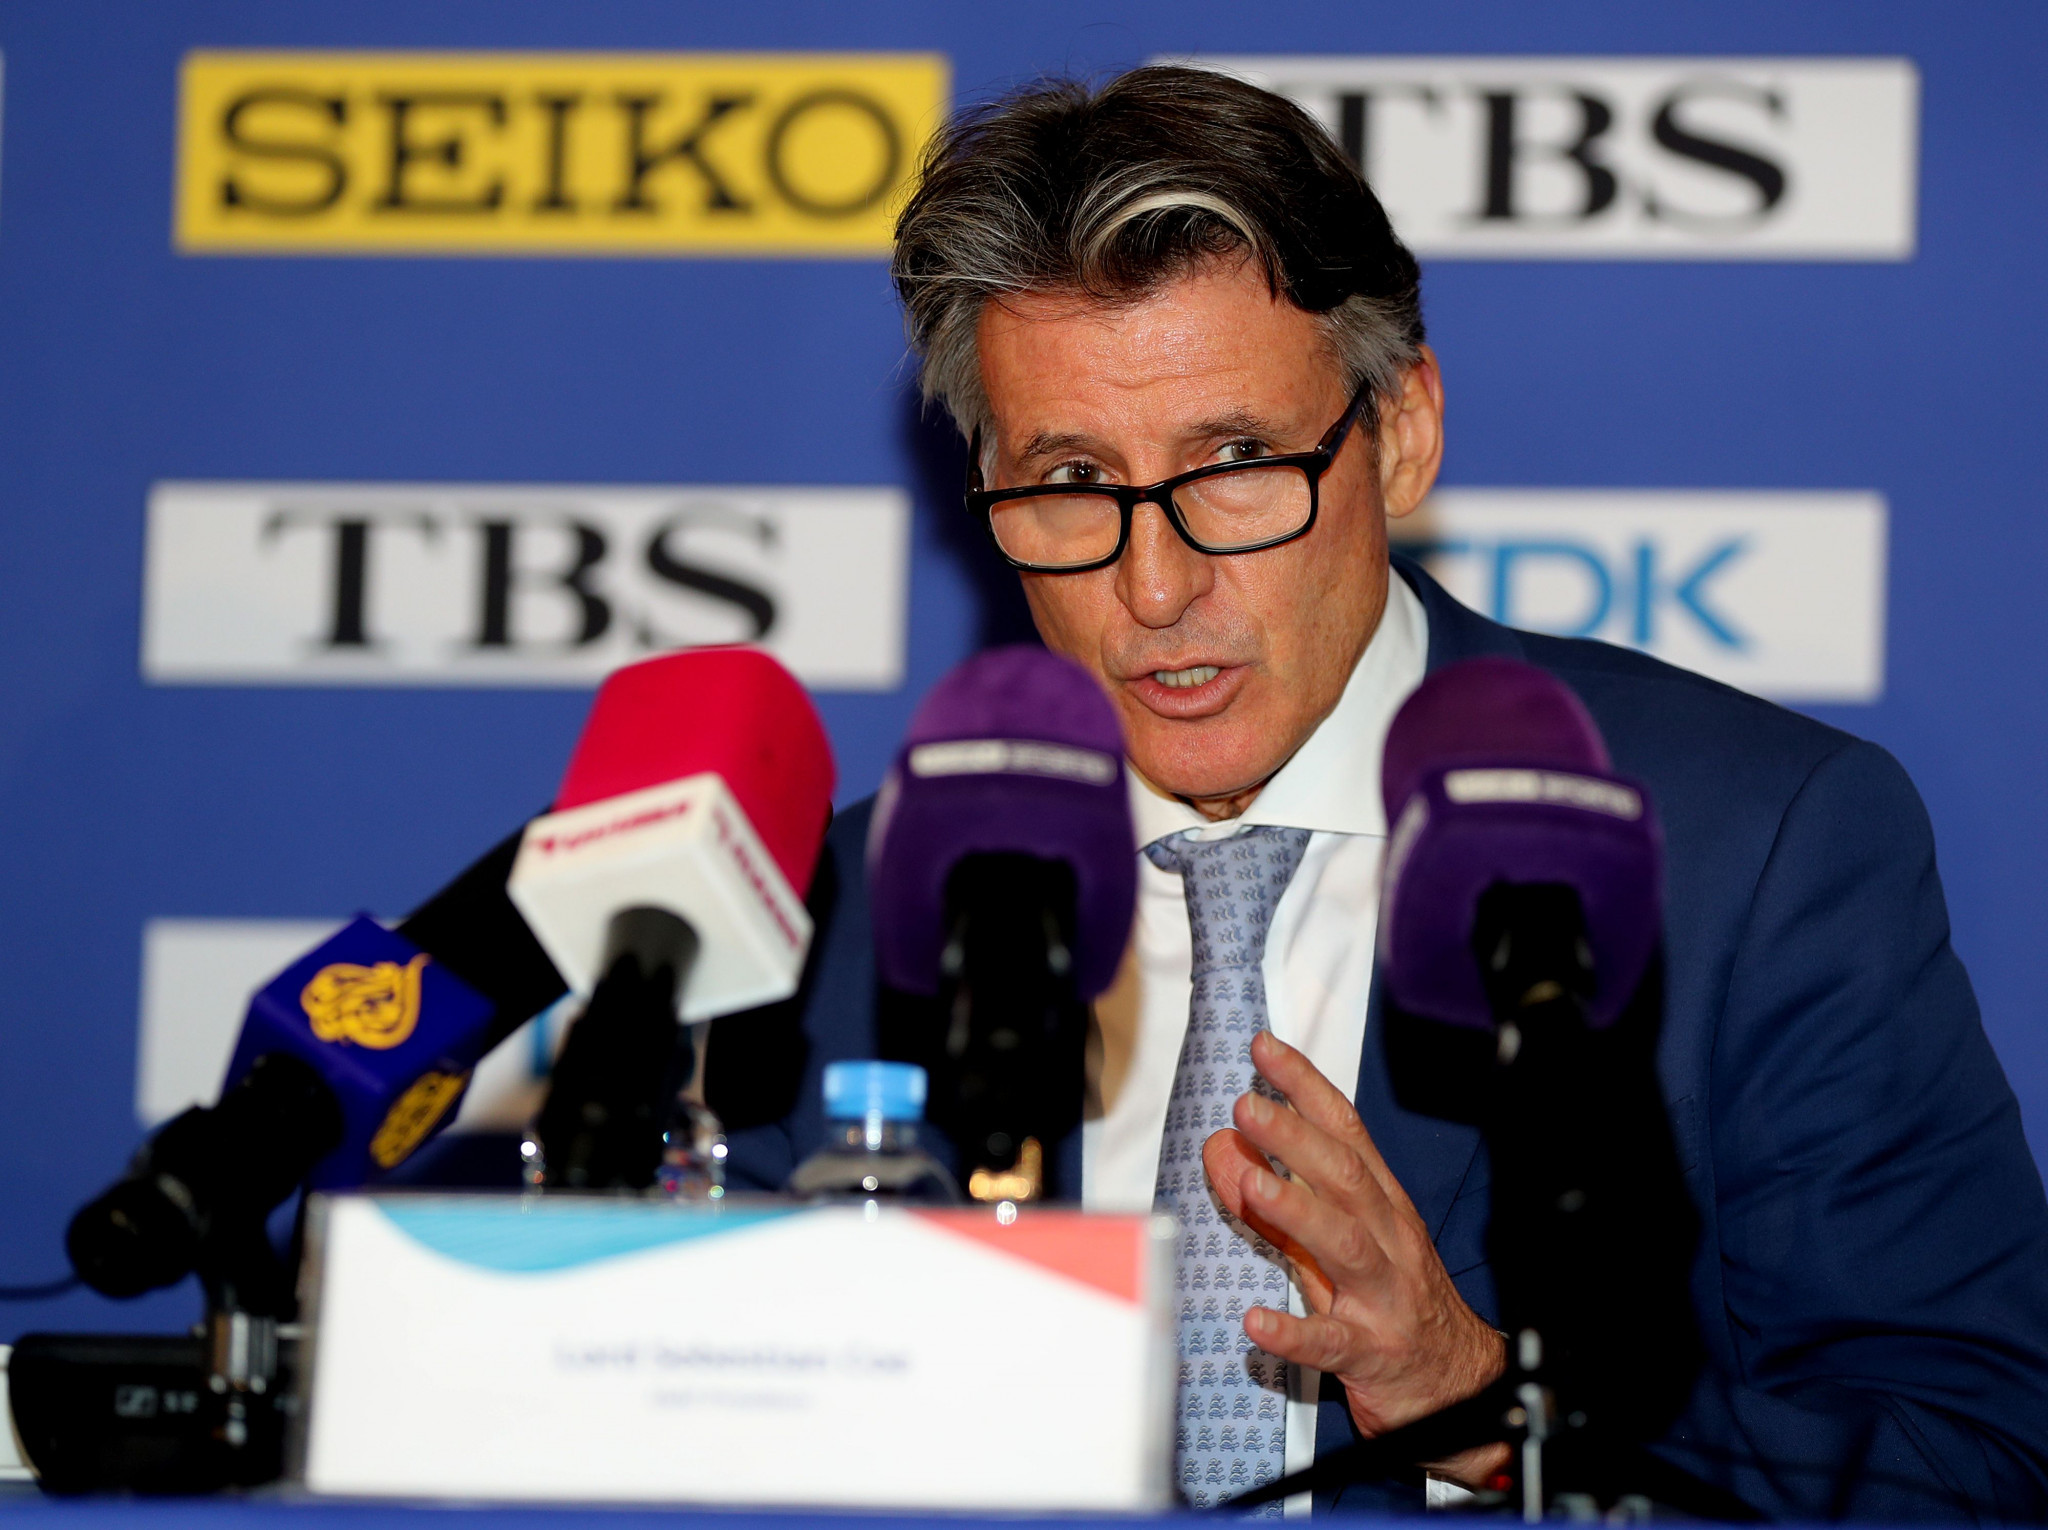 IAAF President Sebastian Coe has said the governing body will not use a new world ranking system to qualify athletes for the 2019 World Championships ©Getty Images